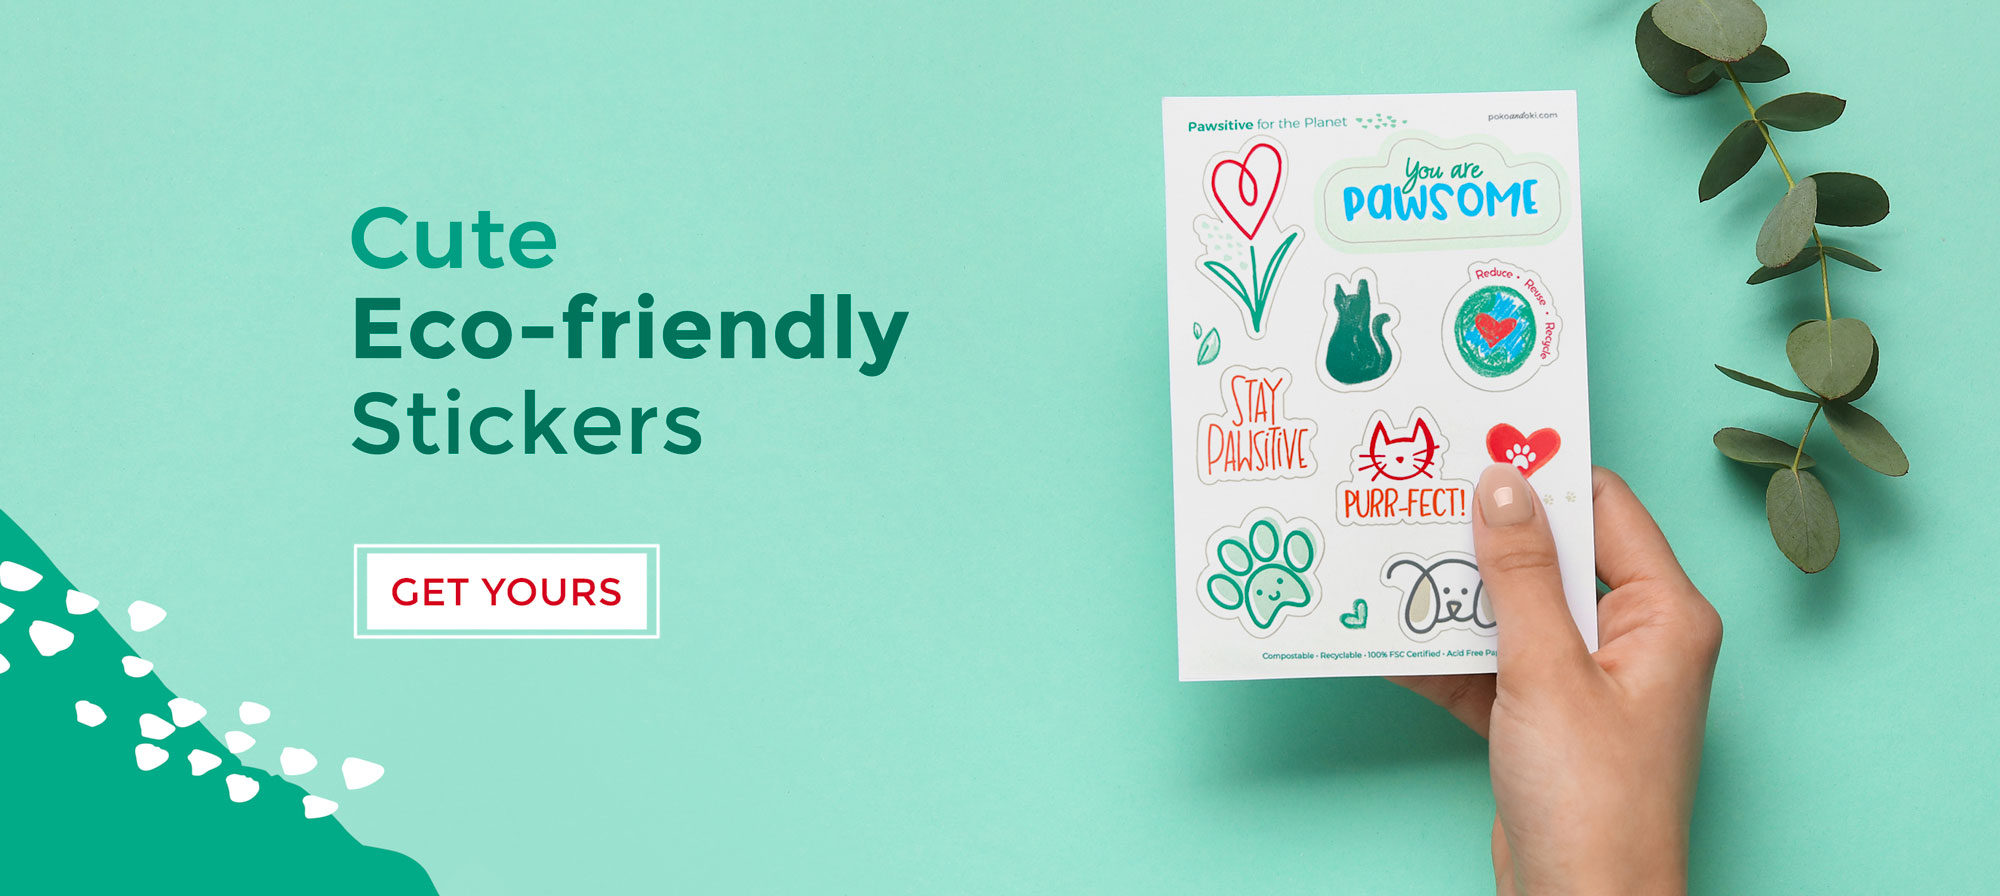 Cute eco-friendly stickers - Pawsitive for the Planet